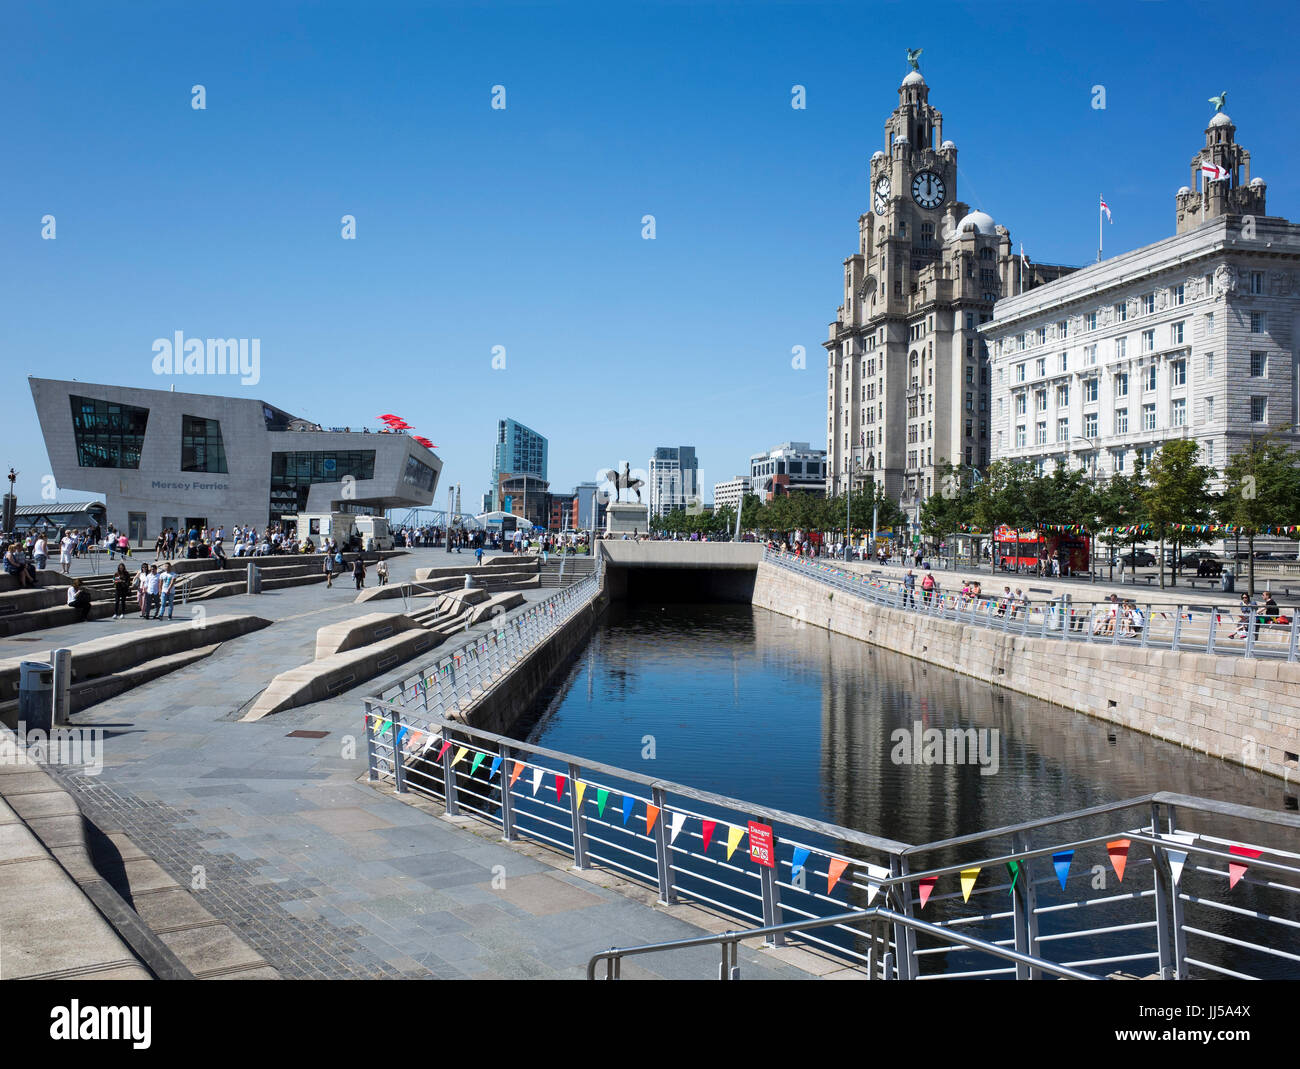 Pier Head Liverpool showing (L to R) Mersey Ferries terminal, Royal Liver Building and Cunard Building. In the centre is the Liverpool Canal Link. Stock Photo